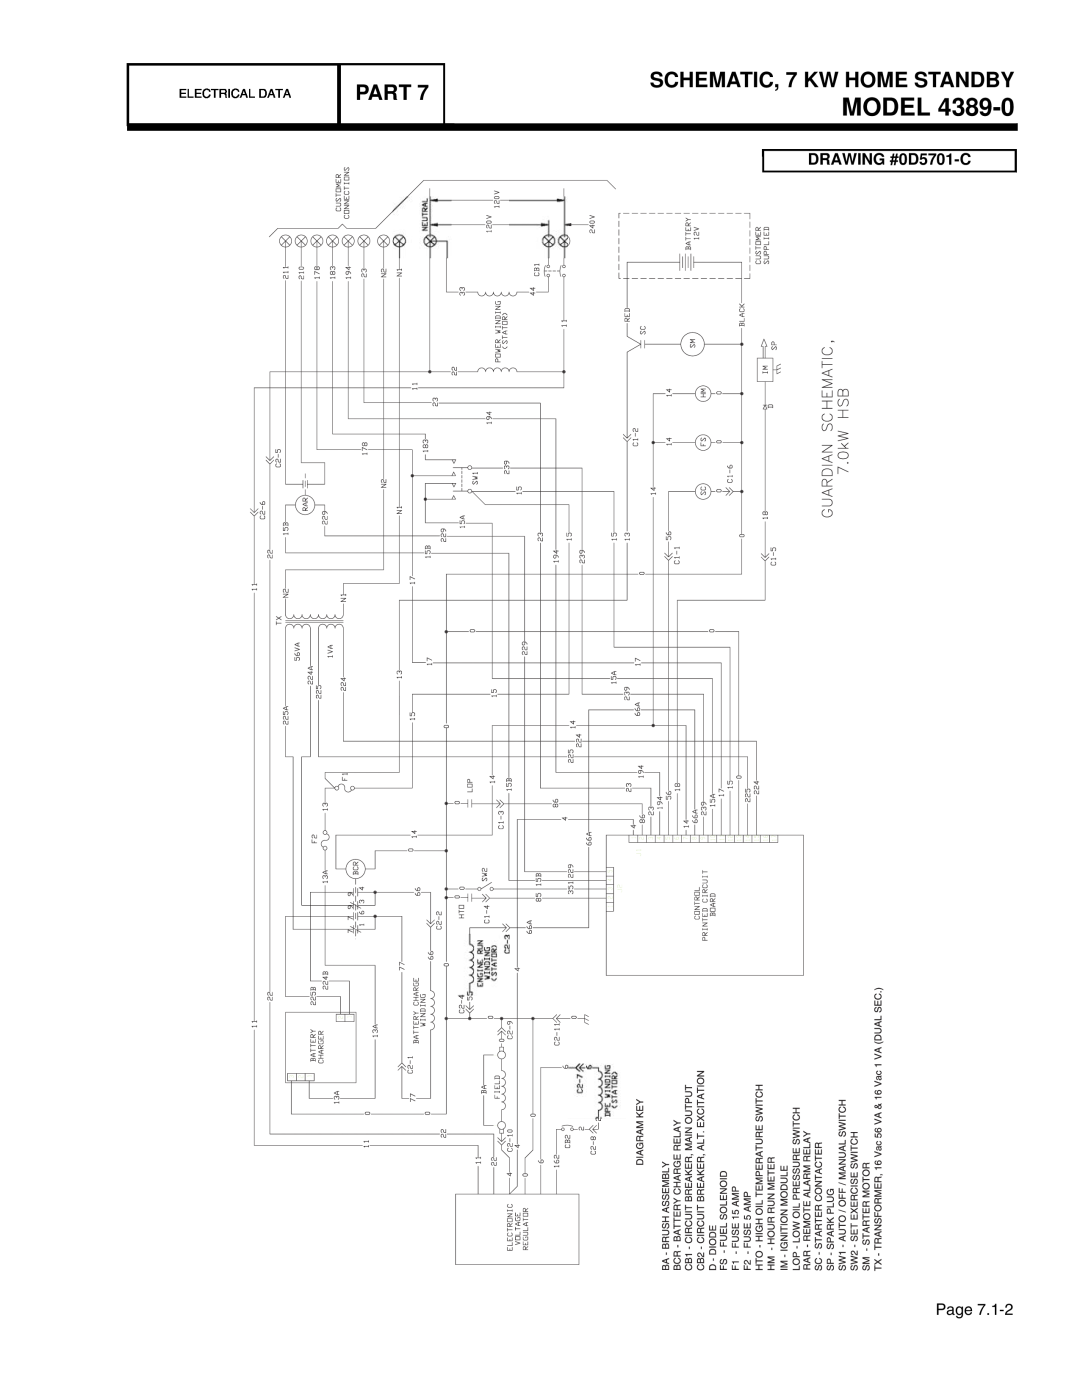 Guardian Technologies 4456, 4390, 4389, 4760 SCHEMATIC, 7 KW HOME STANDBY, Model, Part, DRAWING #0D5701-C, Electrical Data 